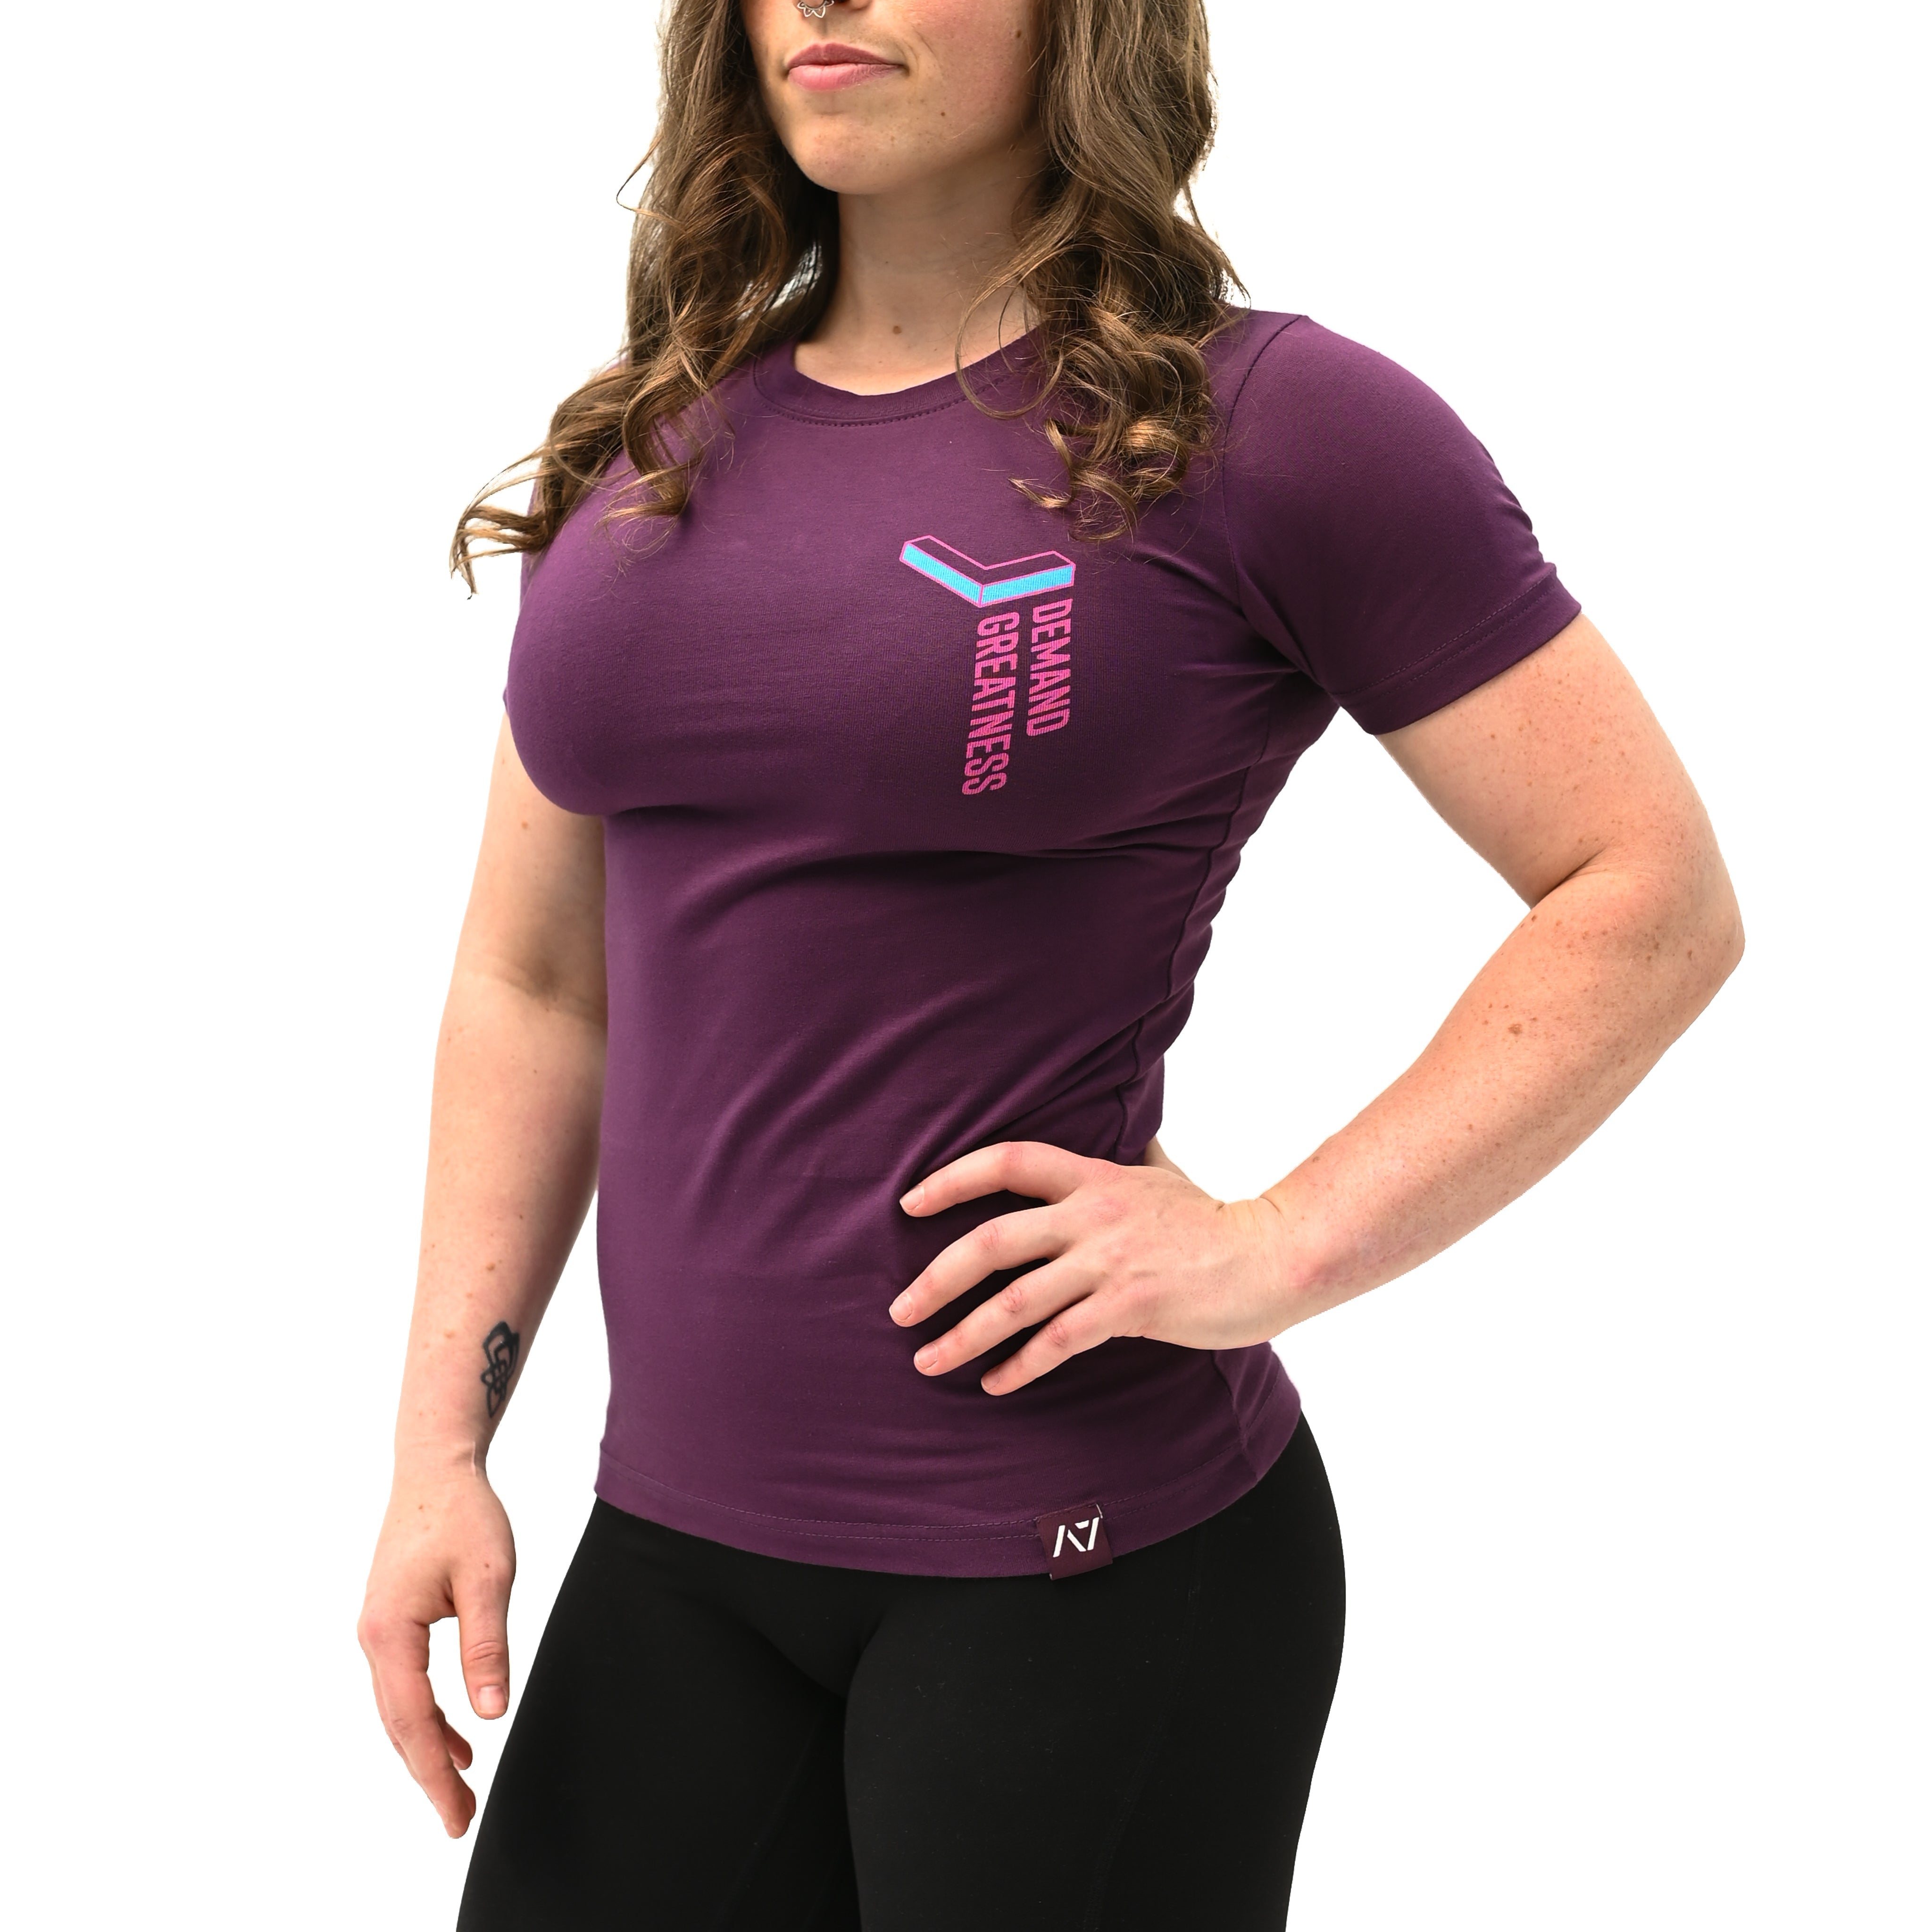 Ascend Berry Non Bar Grip T-Shirt is perfect for in and out of the gym. Purchase Ascend Berry Non Bar Grip tshirt UK from A7 UK. Purchase Ascend Berry Shirt Europe from A7 UK. Best gymwear shipping to UK and Europe from A7 UK. Ascend Berry is our newest Non Bar Grip Design. The best Powerlifting apparel for all your workouts. Available in UK and Europe including France, Italy, Germany, Sweden and Poland.